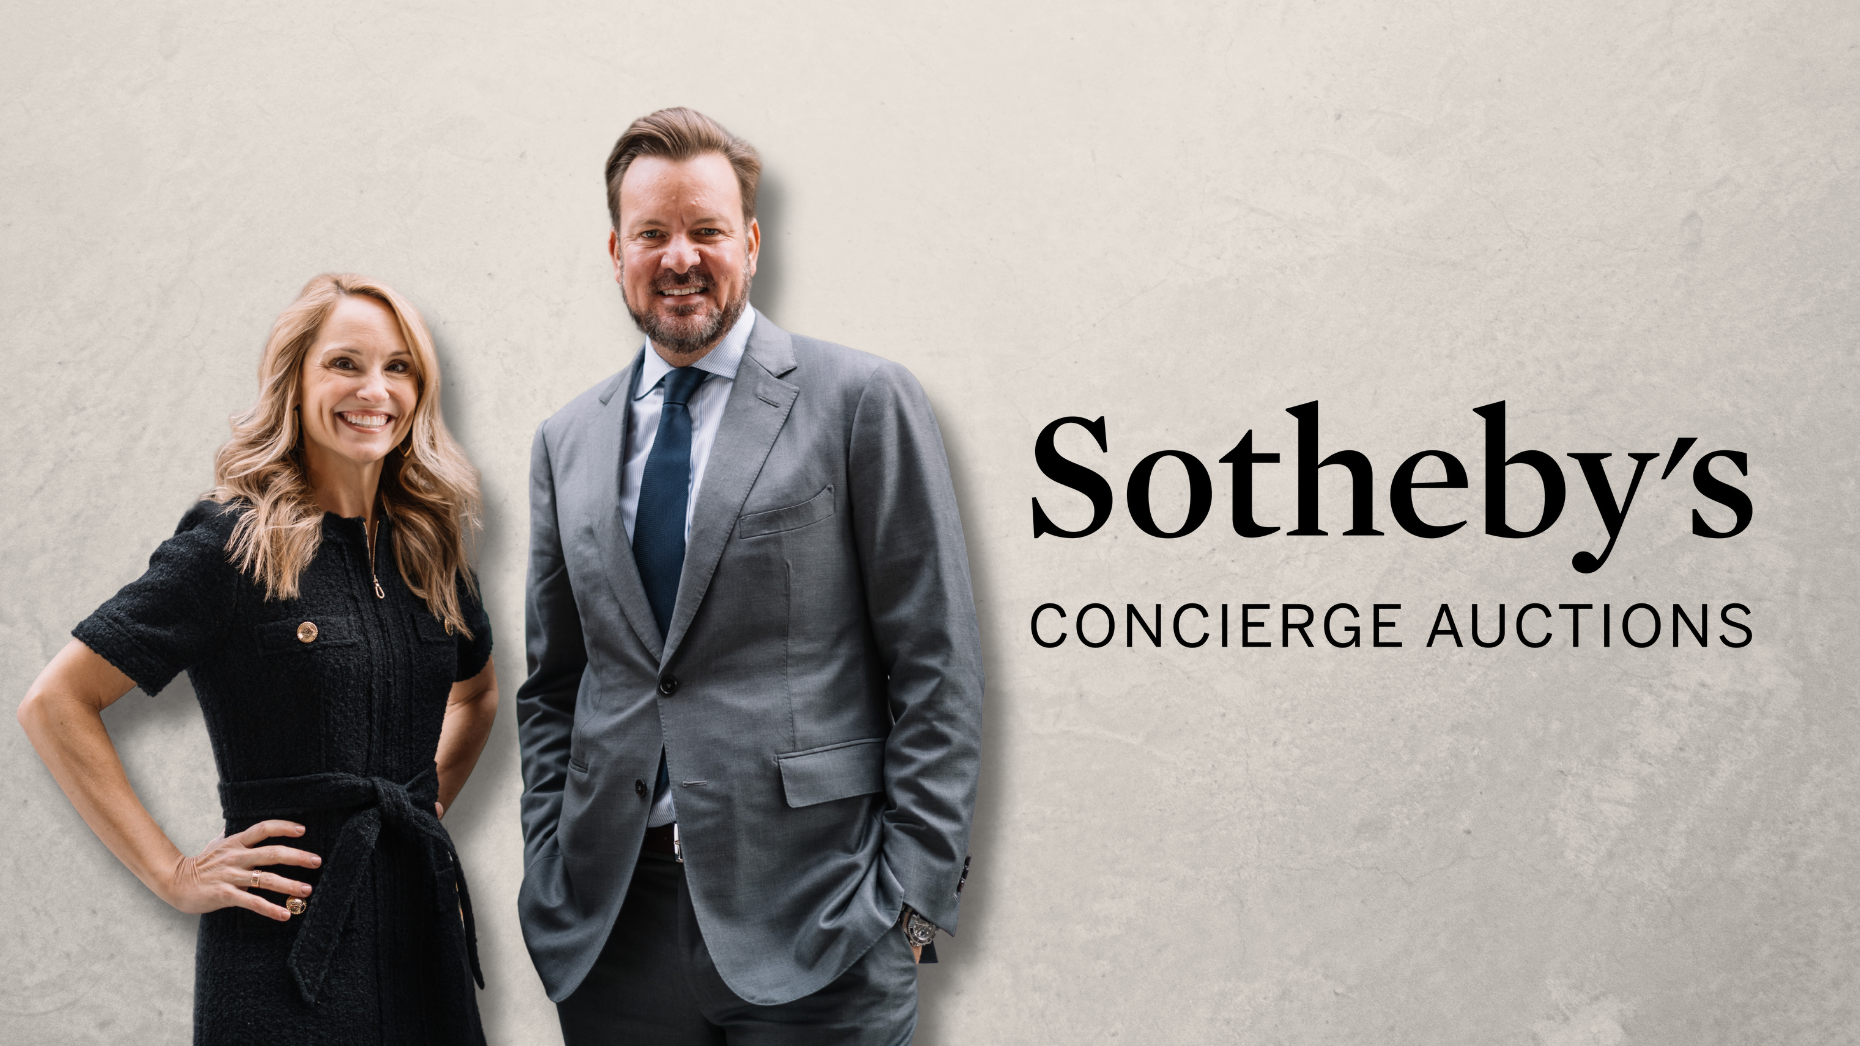 Concierge Auctions To Rebrand With Sotheby's Name Attached - Inman